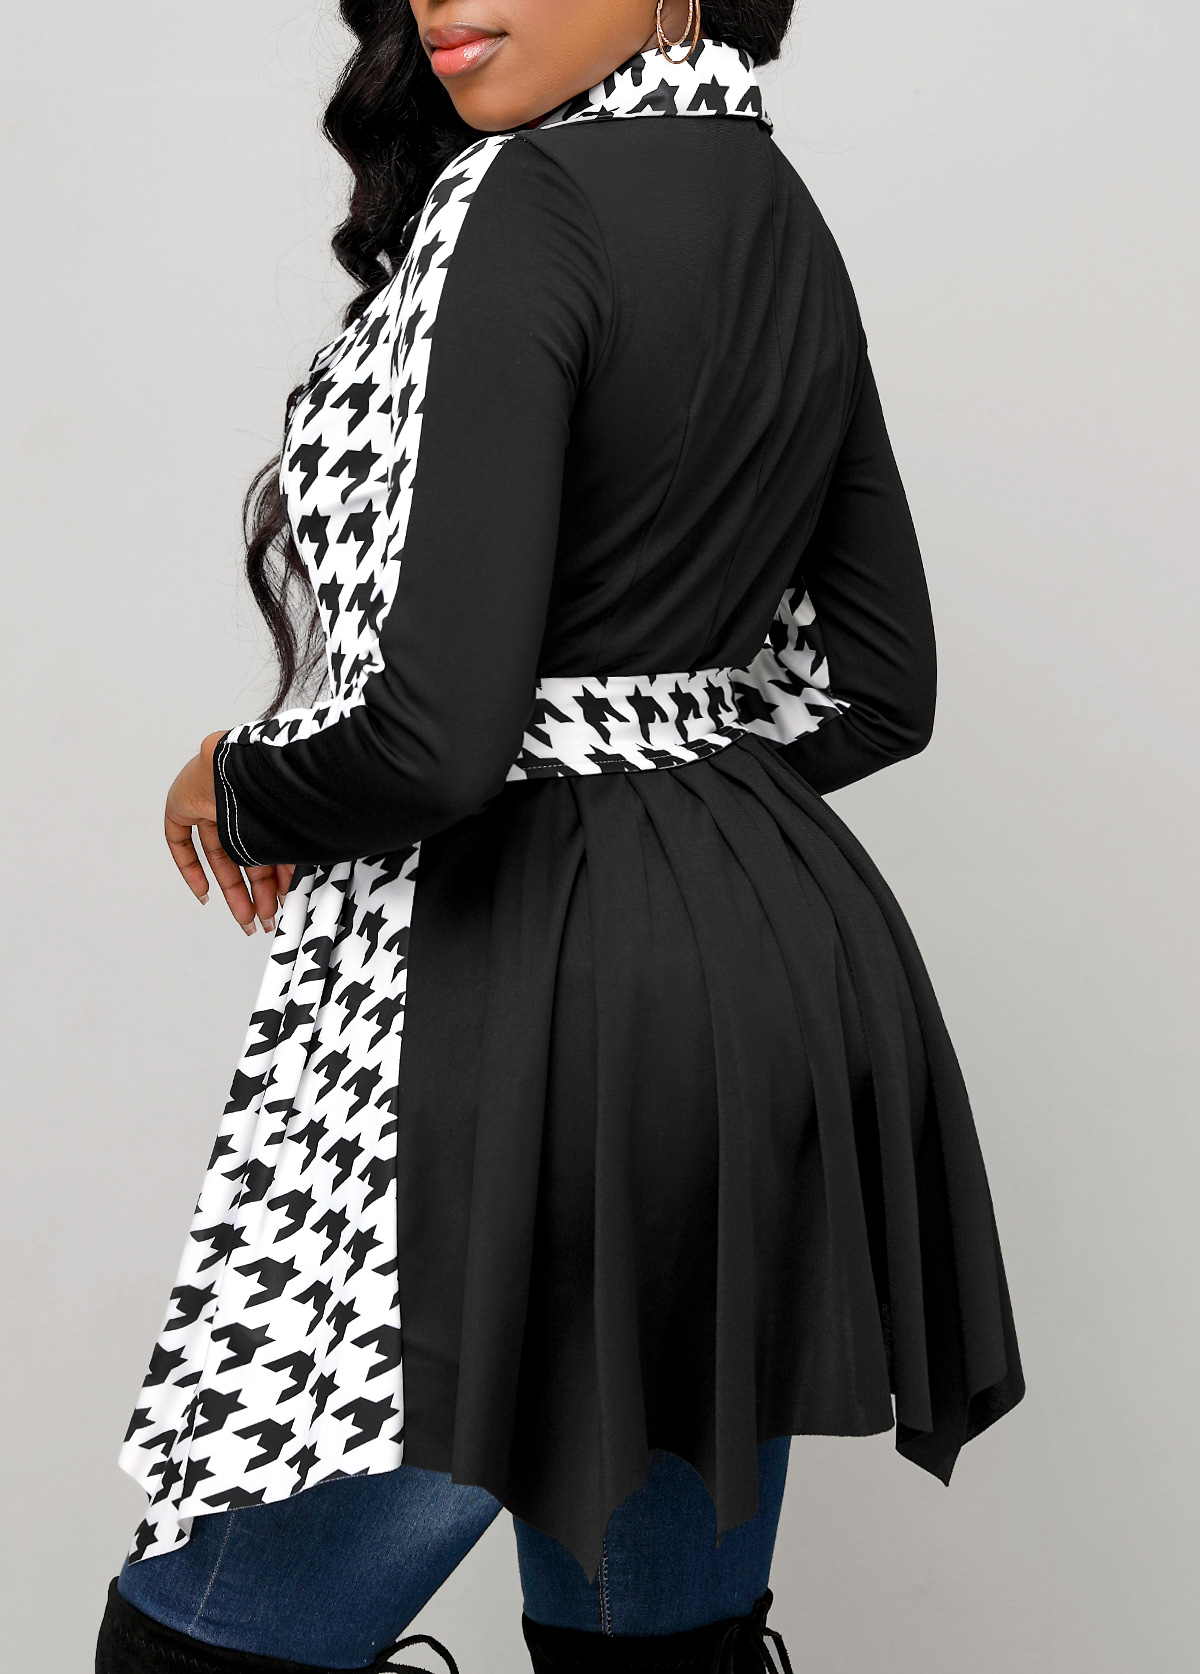 Houndstooth Print Button Belted Black Lapel Coat